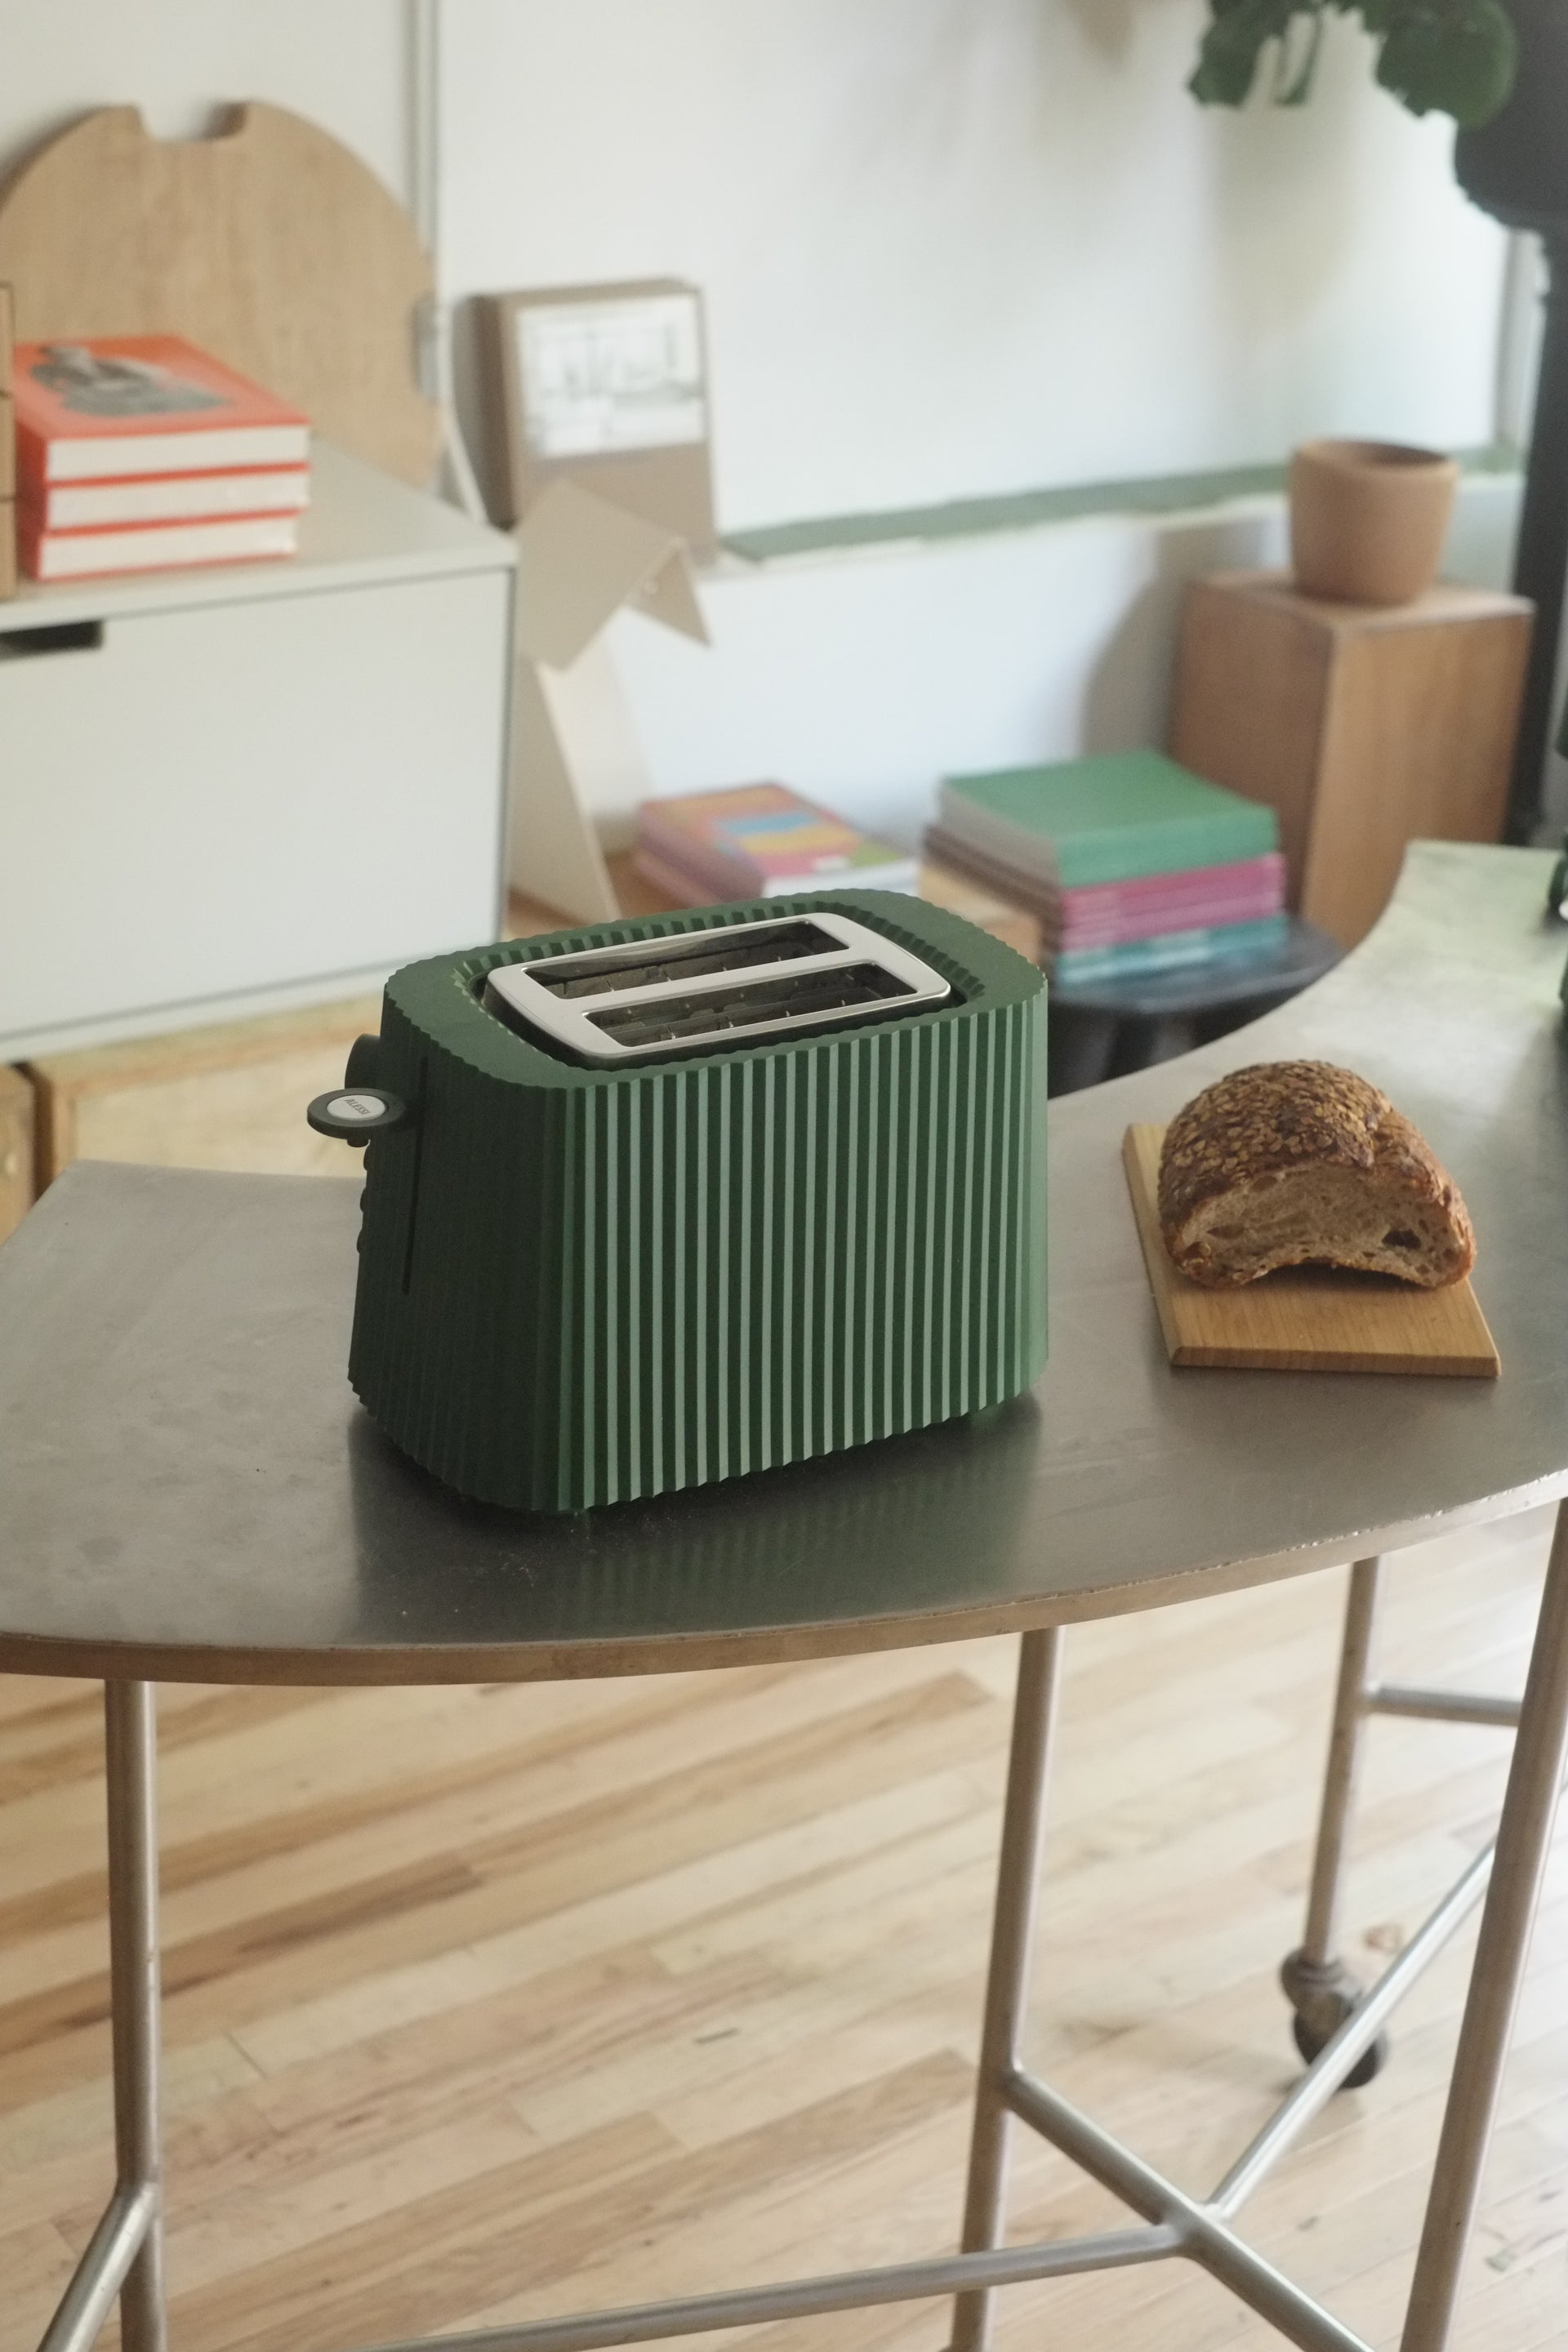 Plissé ELECTRIC Toaster by Michele De Lucchi for Alessi (Green)